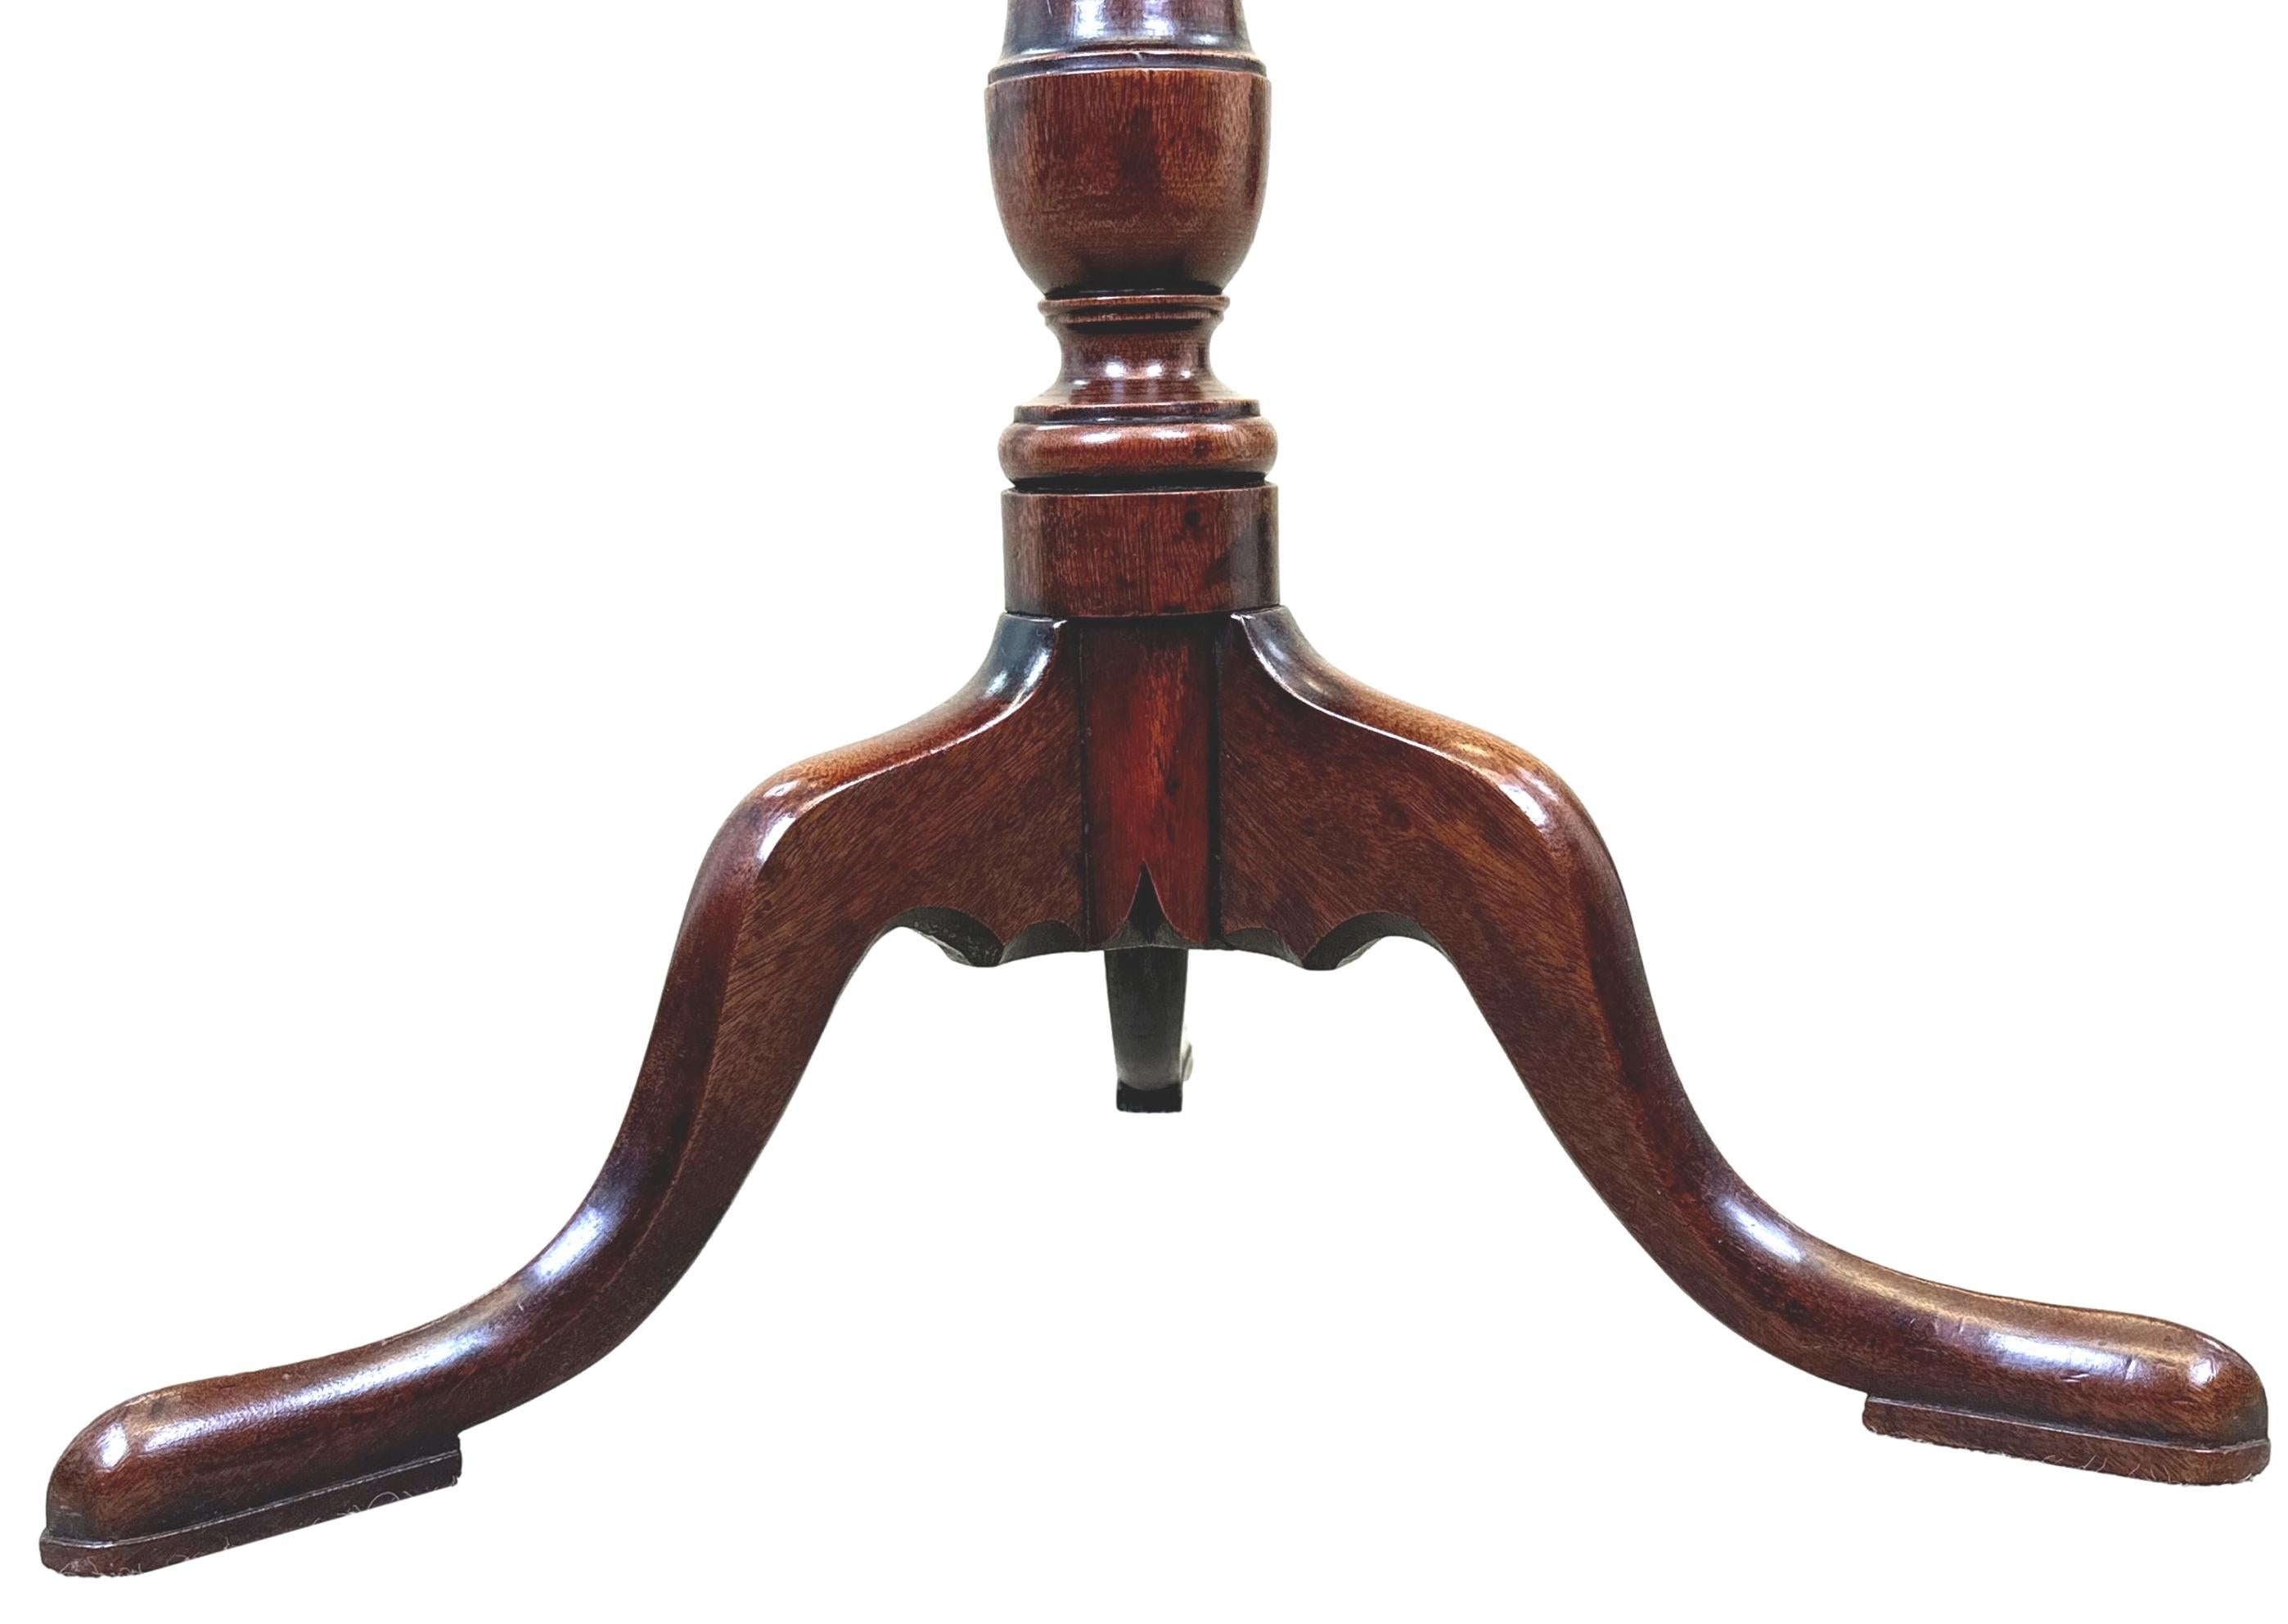 An Extremely Charming 18th Century, Georgian, Mahogany Wine Table, Or Candle Stand, Having Superbly Figured Top With Elegant Wavy Galleried Edge, Raised On Turned Central Column With Splayed Tripod Legs.

Circa 1750.

Height 28in.
Width 13in.
Depth